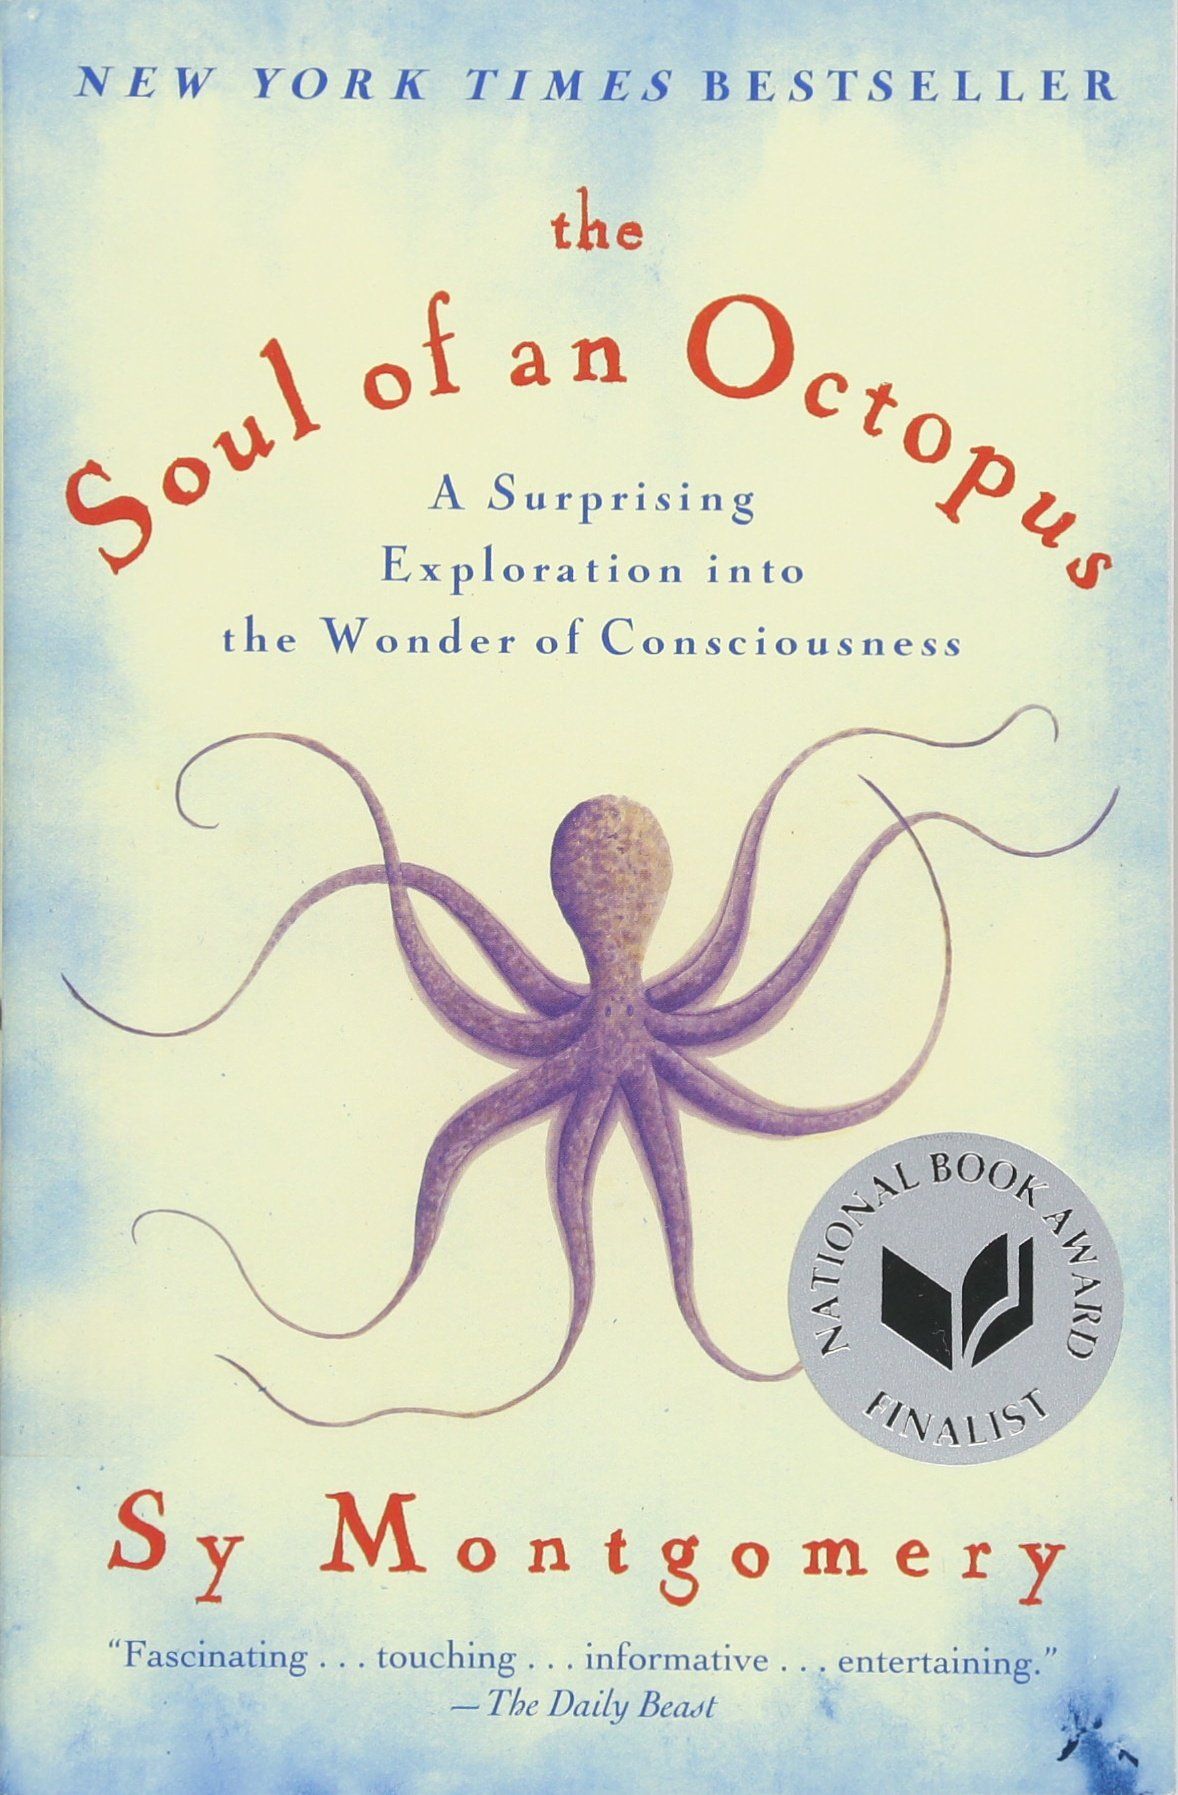 Book: The Soul of an Octopus: A Surprising Exploration Into the Wonder of Consciousness